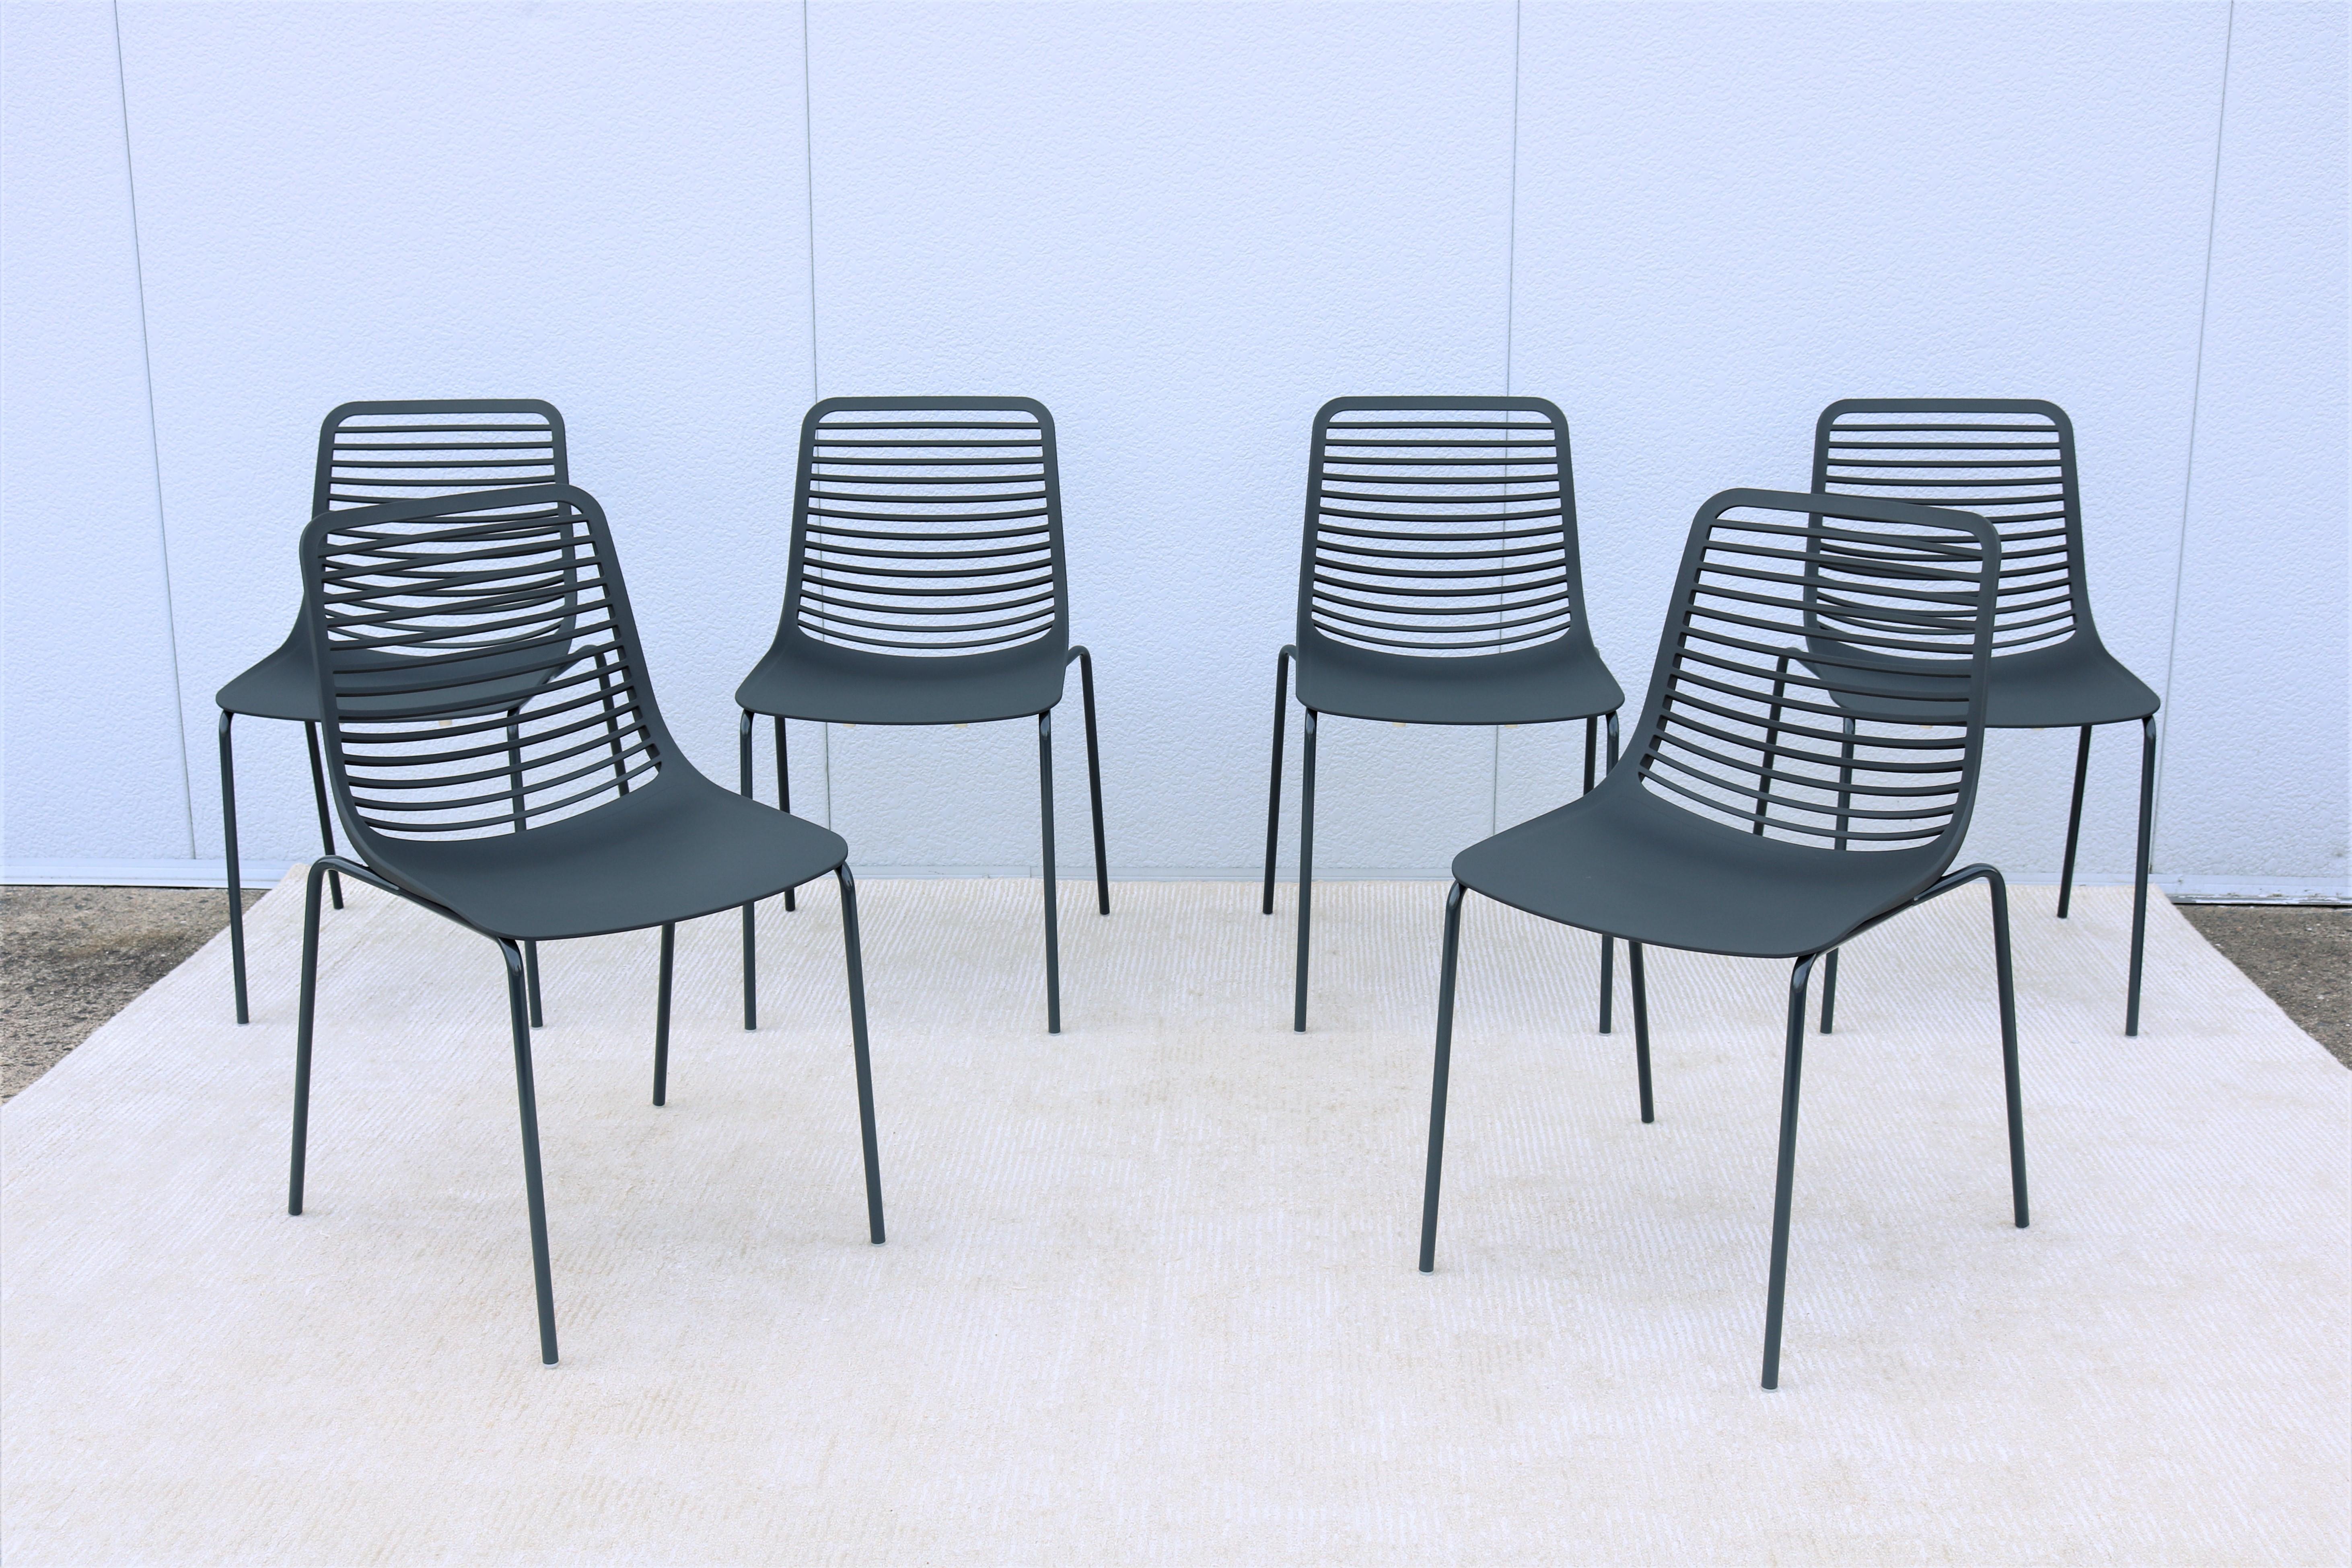 The Mini stacking chair by Parri is very sleek with a clean contemporary look.
Features distinctive style in a contoured silhouette for added comfort. 
The shape of the seat shell provides great freedom of movement in a variety of sitting